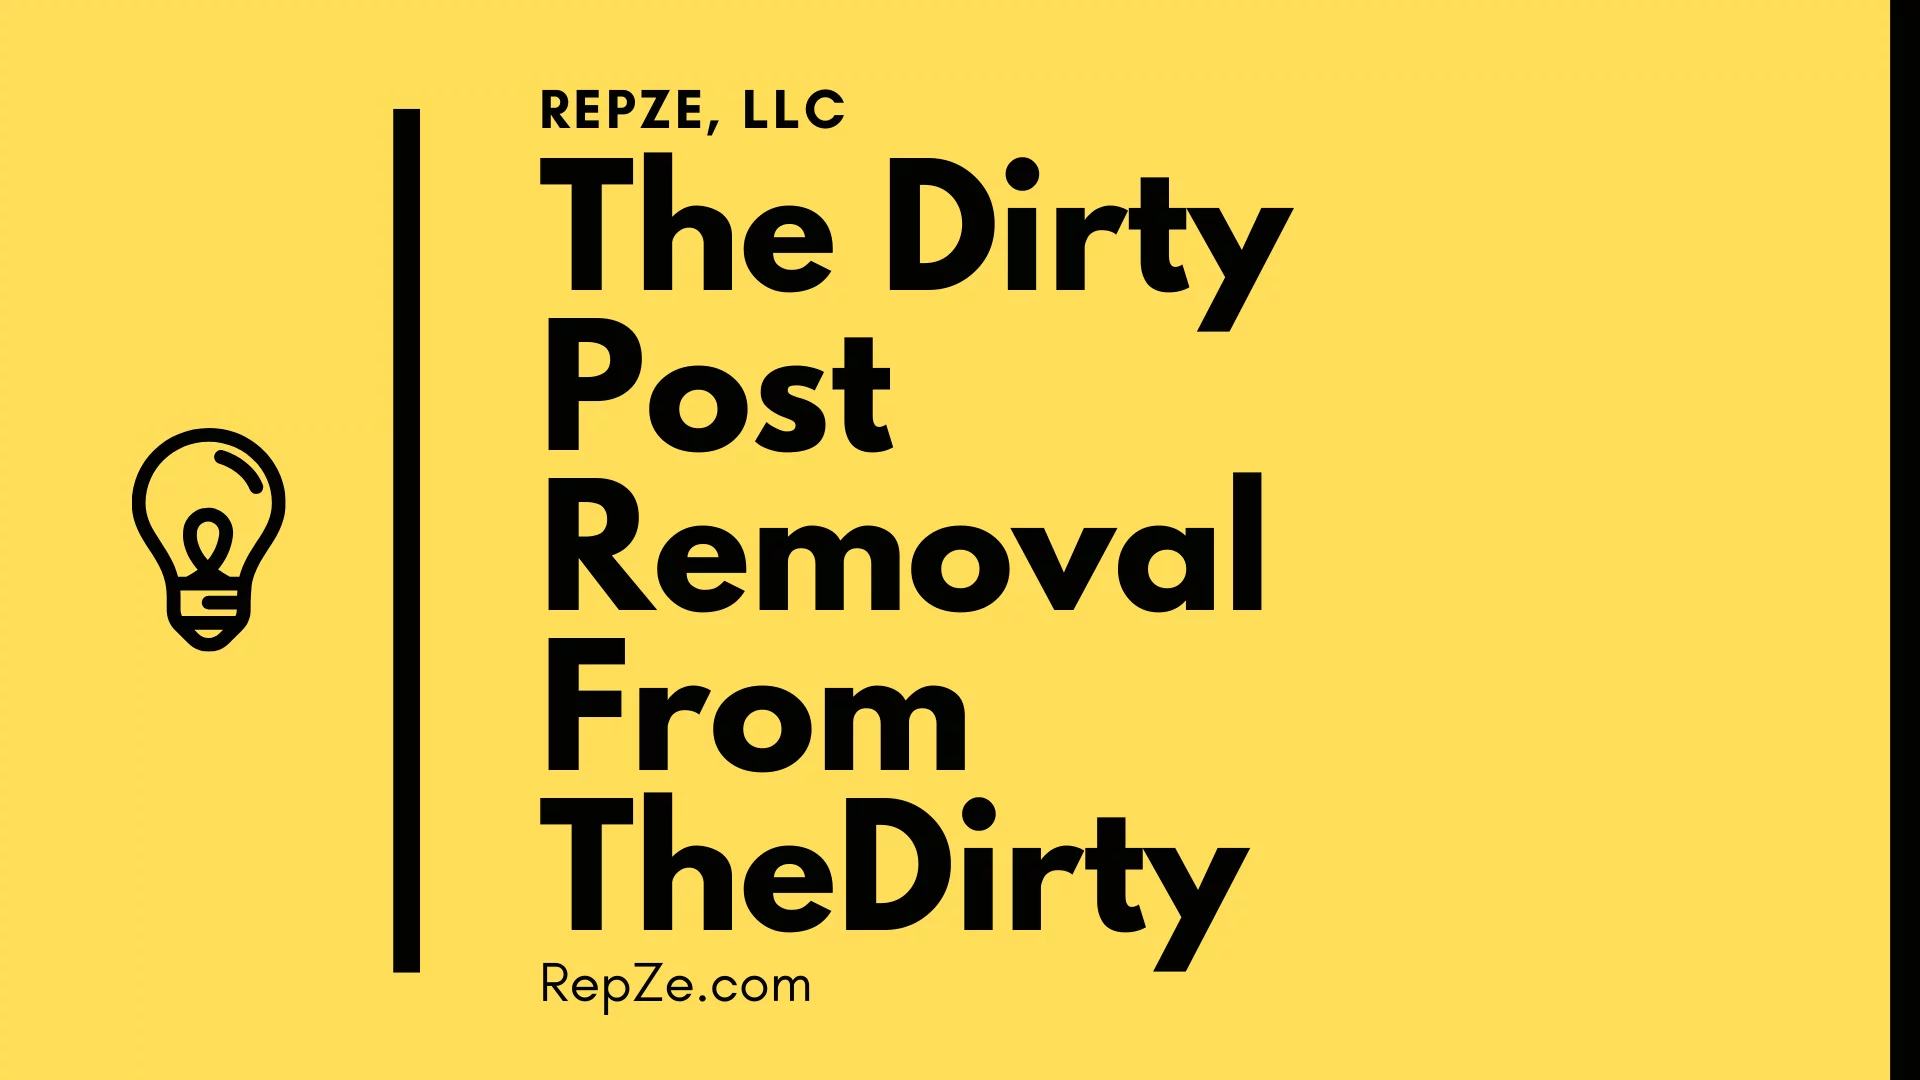 The Dirty Post Removal and Deletion from TheDirty.com - RepZe.com